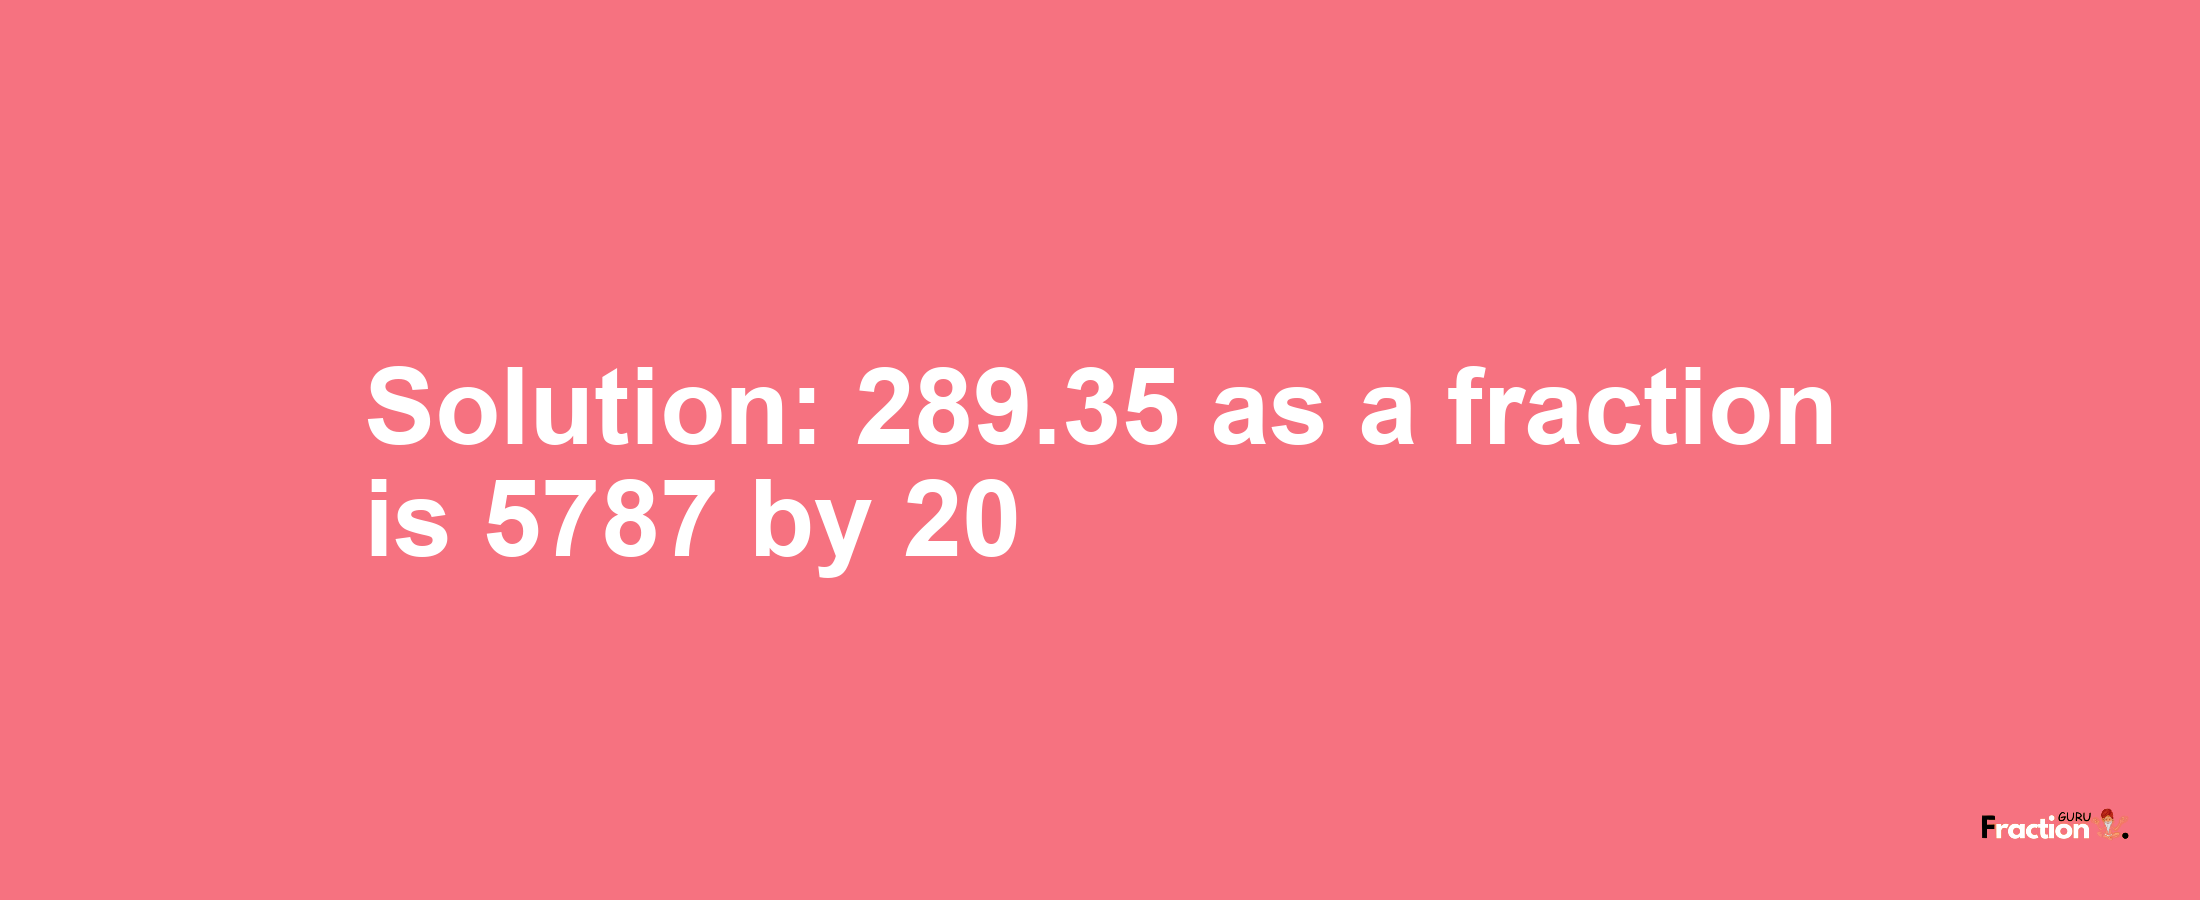 Solution:289.35 as a fraction is 5787/20